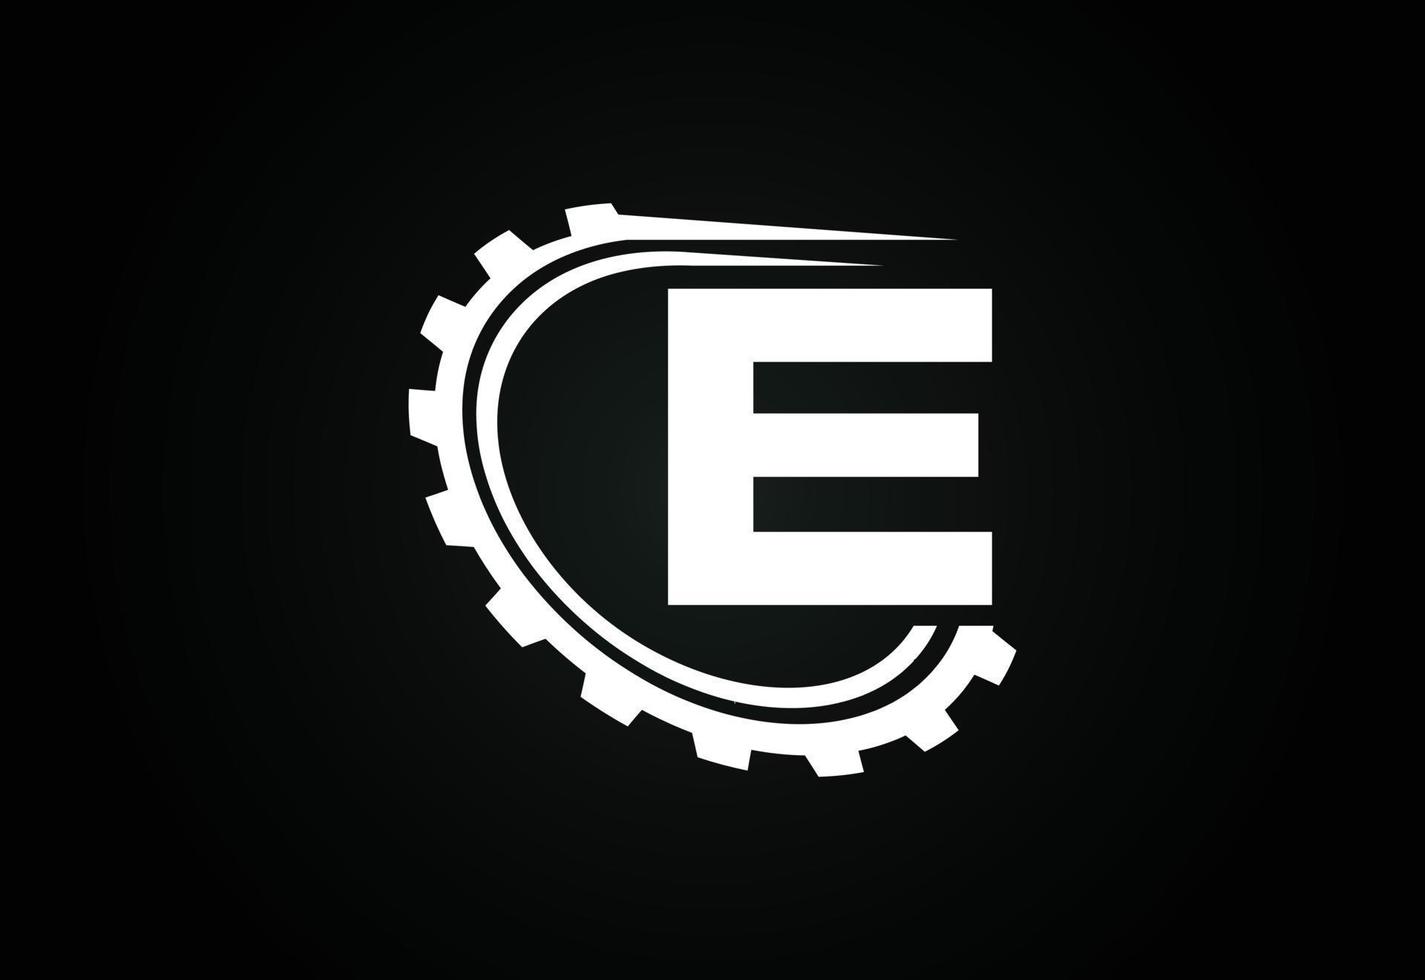 Initial E alphabet with a gear. Gear engineer logo design. Logo for automotive, mechanical, technology, setting, repair business, and company identity vector